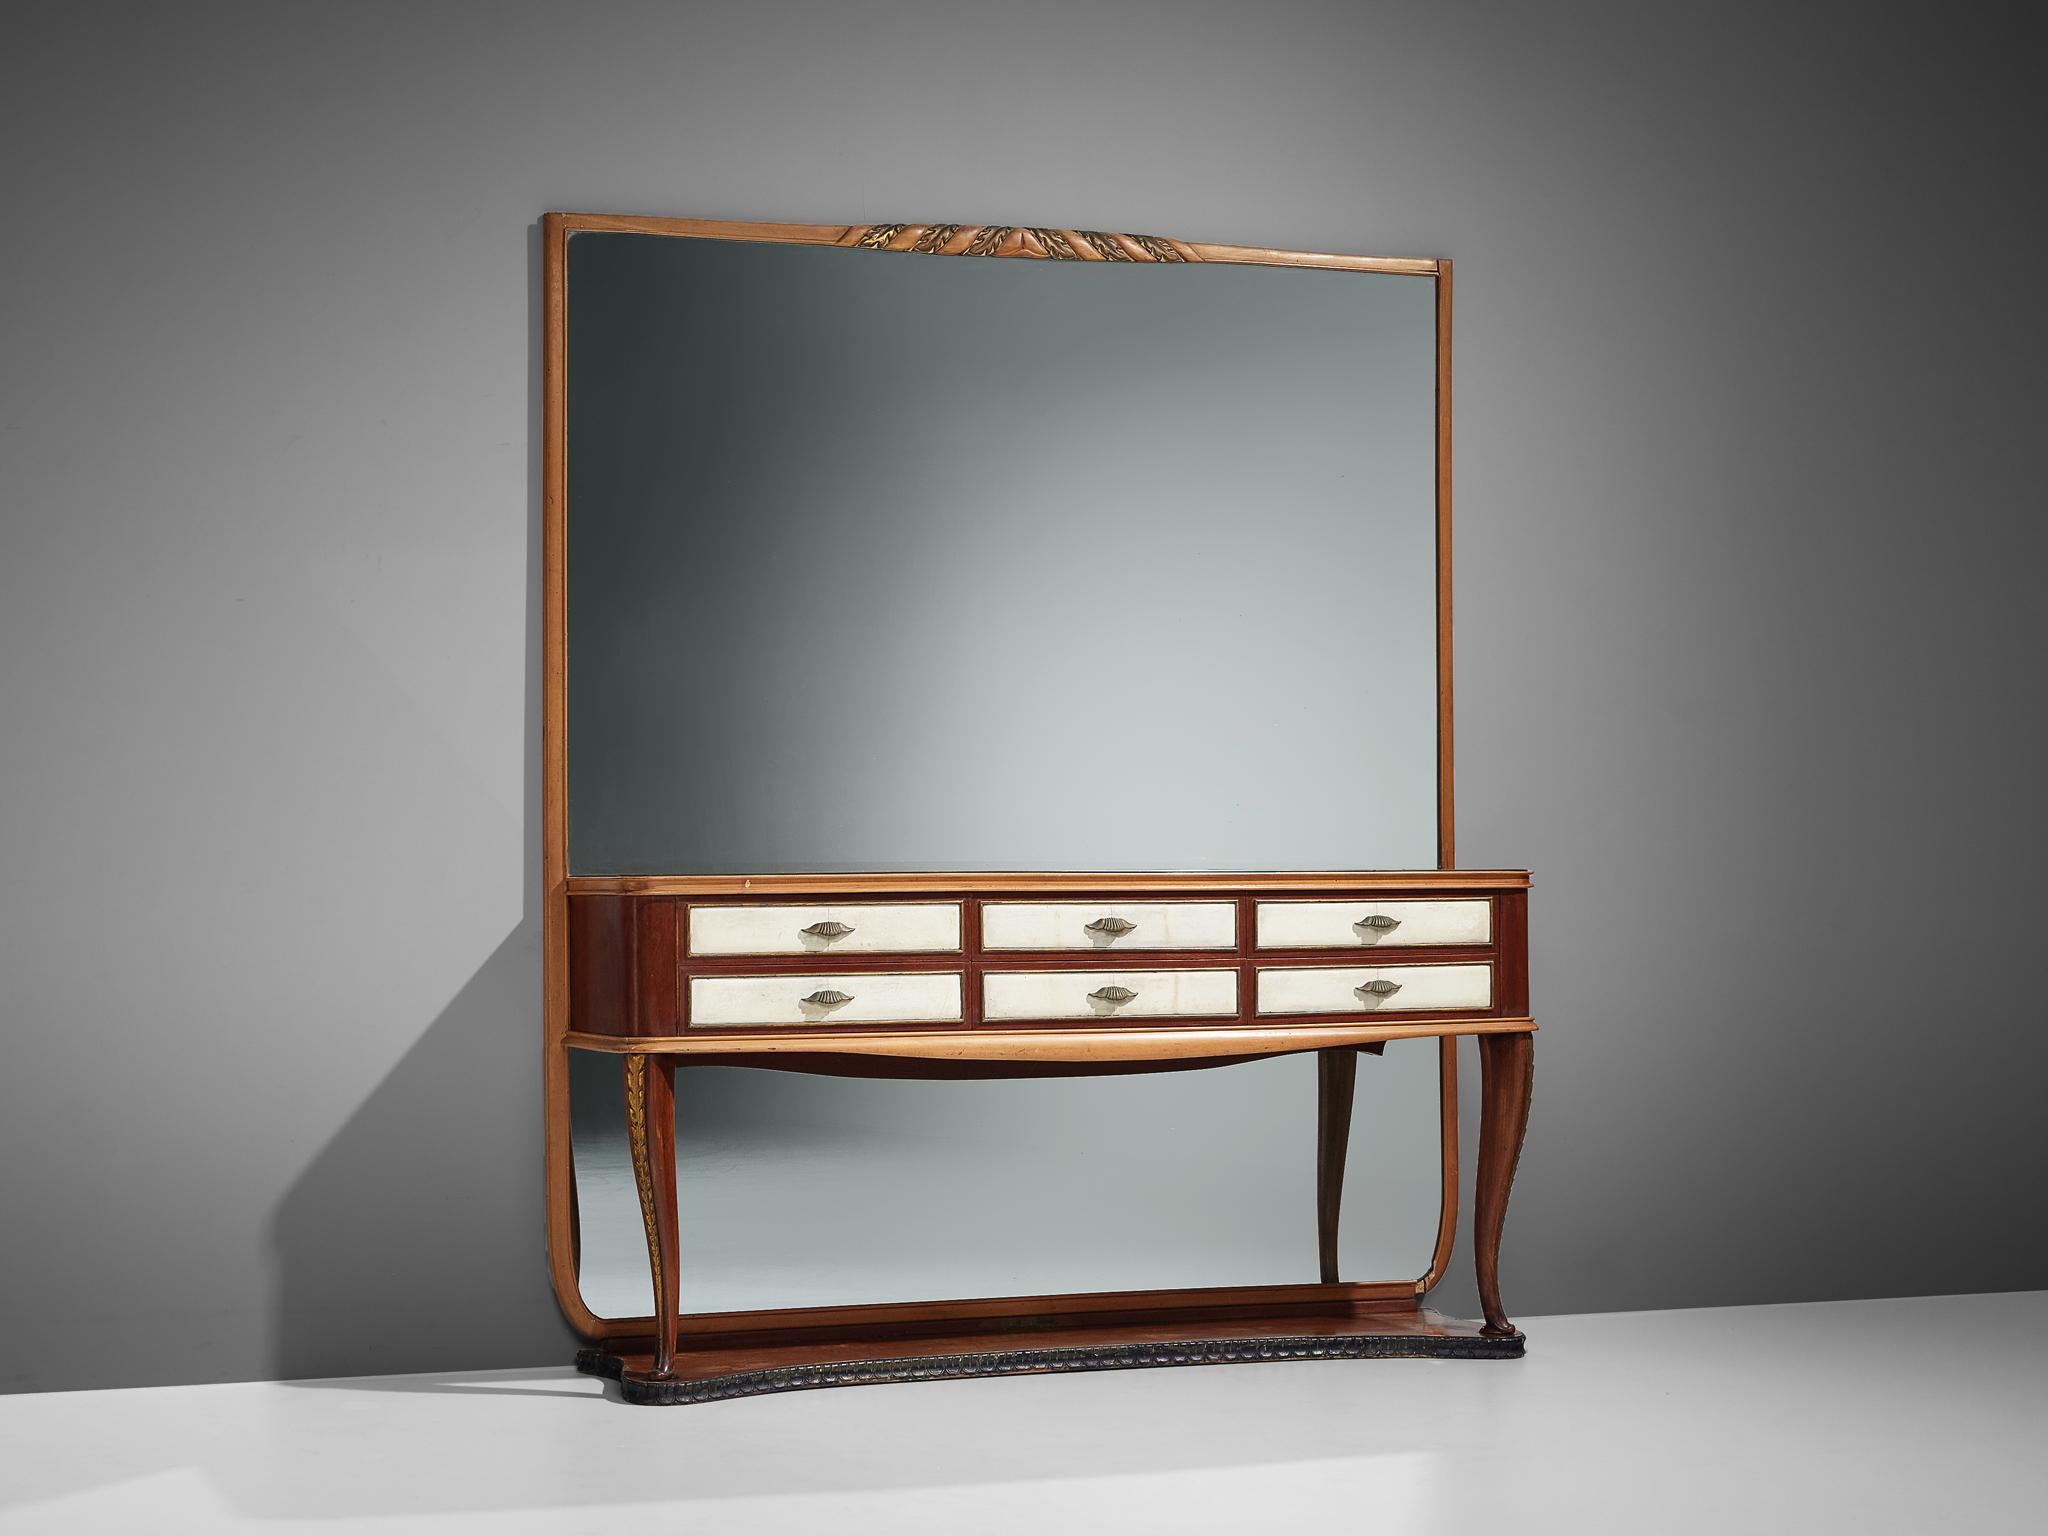 Wall console with large mirror, walnut, lacquered wood, mirror, Italy, 1940s

This Italian wall unit has a truly elegant appearance. The long console is connected to a large mirror which covers the wall above and under the console. The frame of the